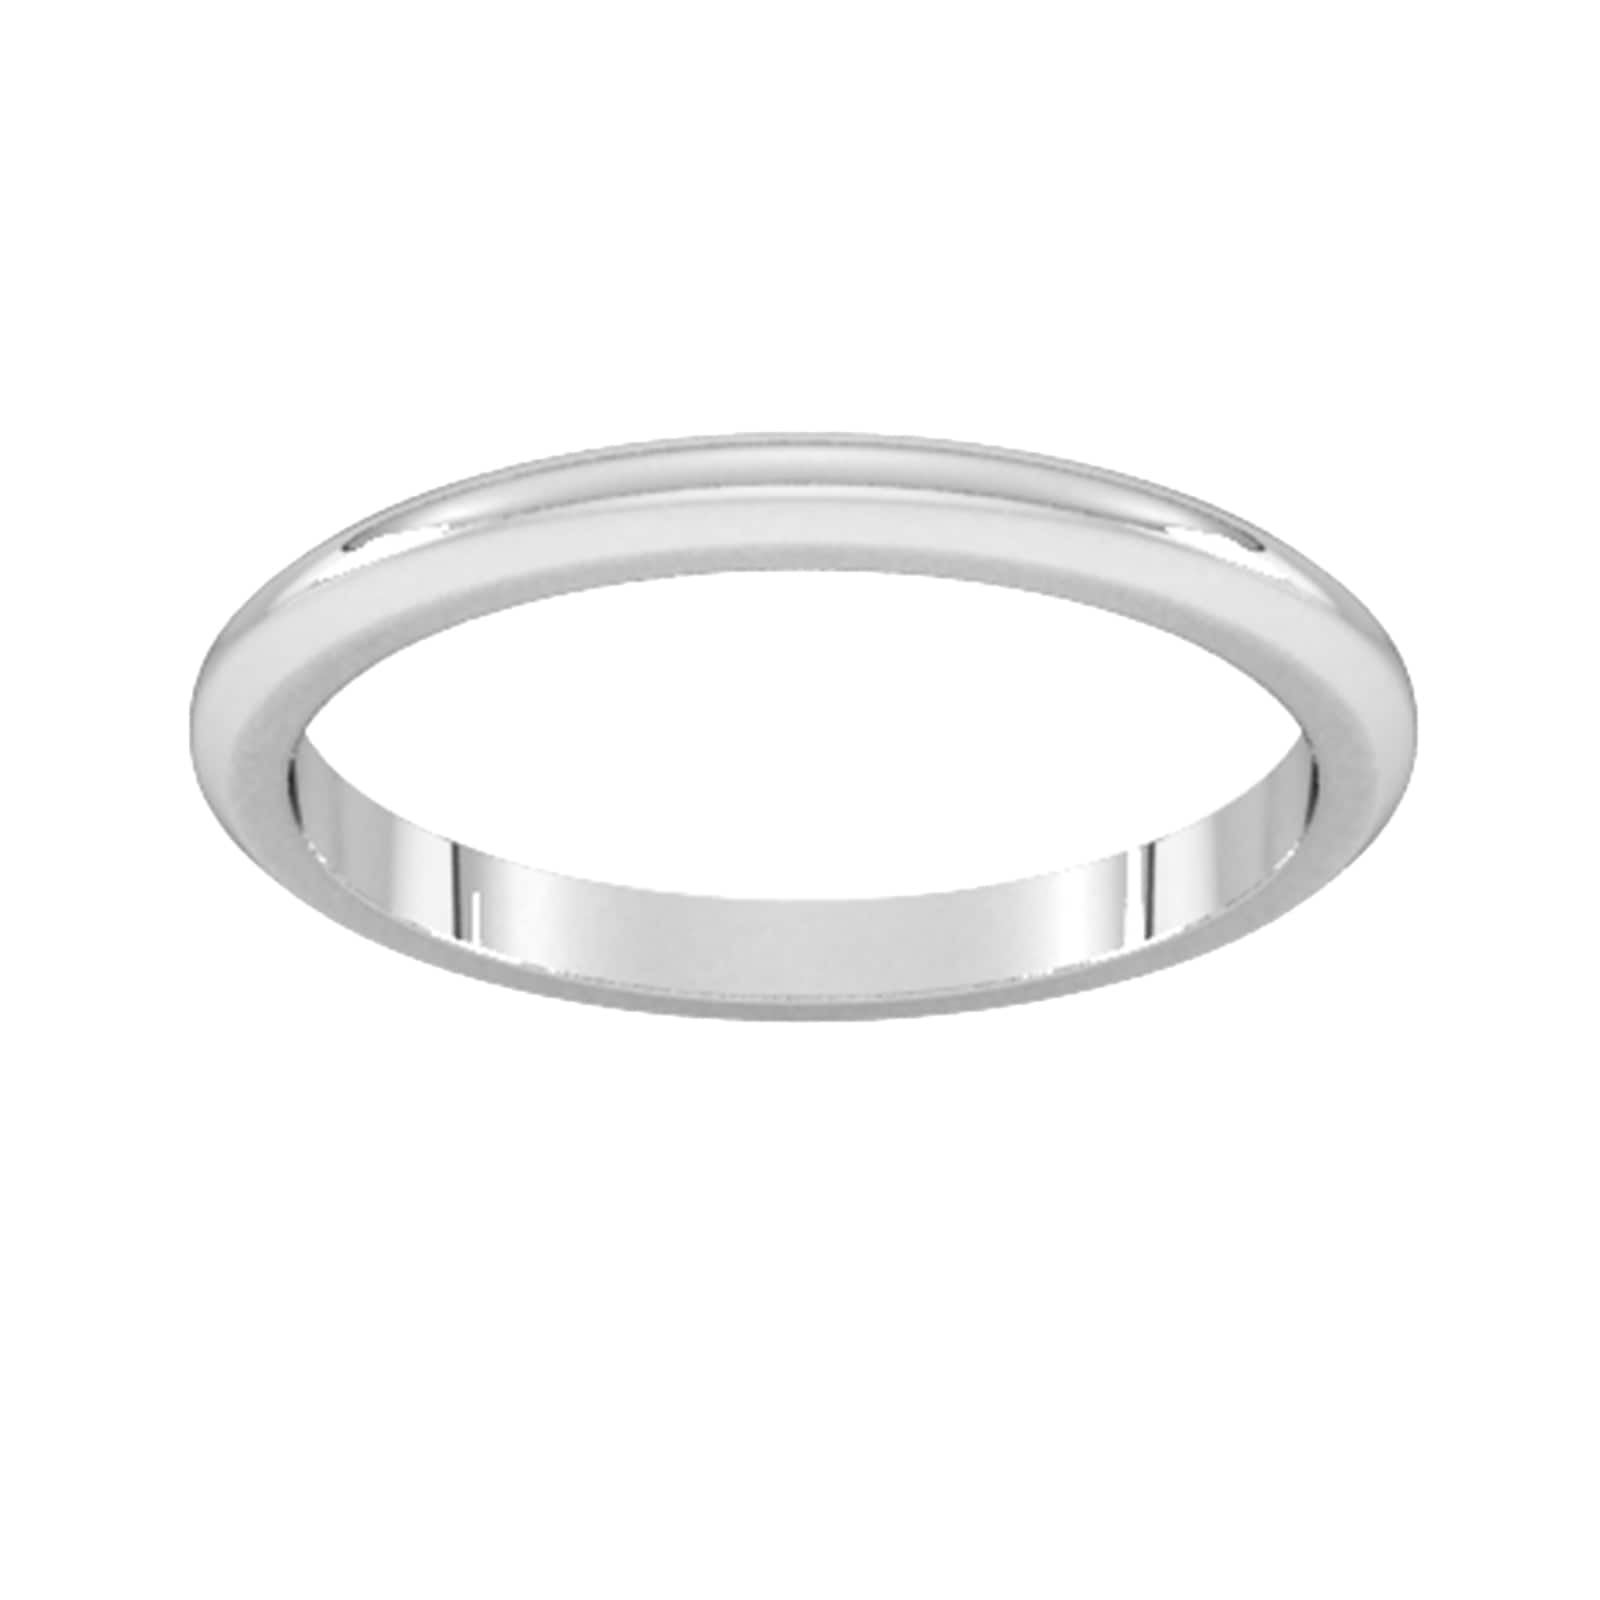 2mm D Shape Heavy Wedding Ring In 9 Carat White Gold - Ring Size O